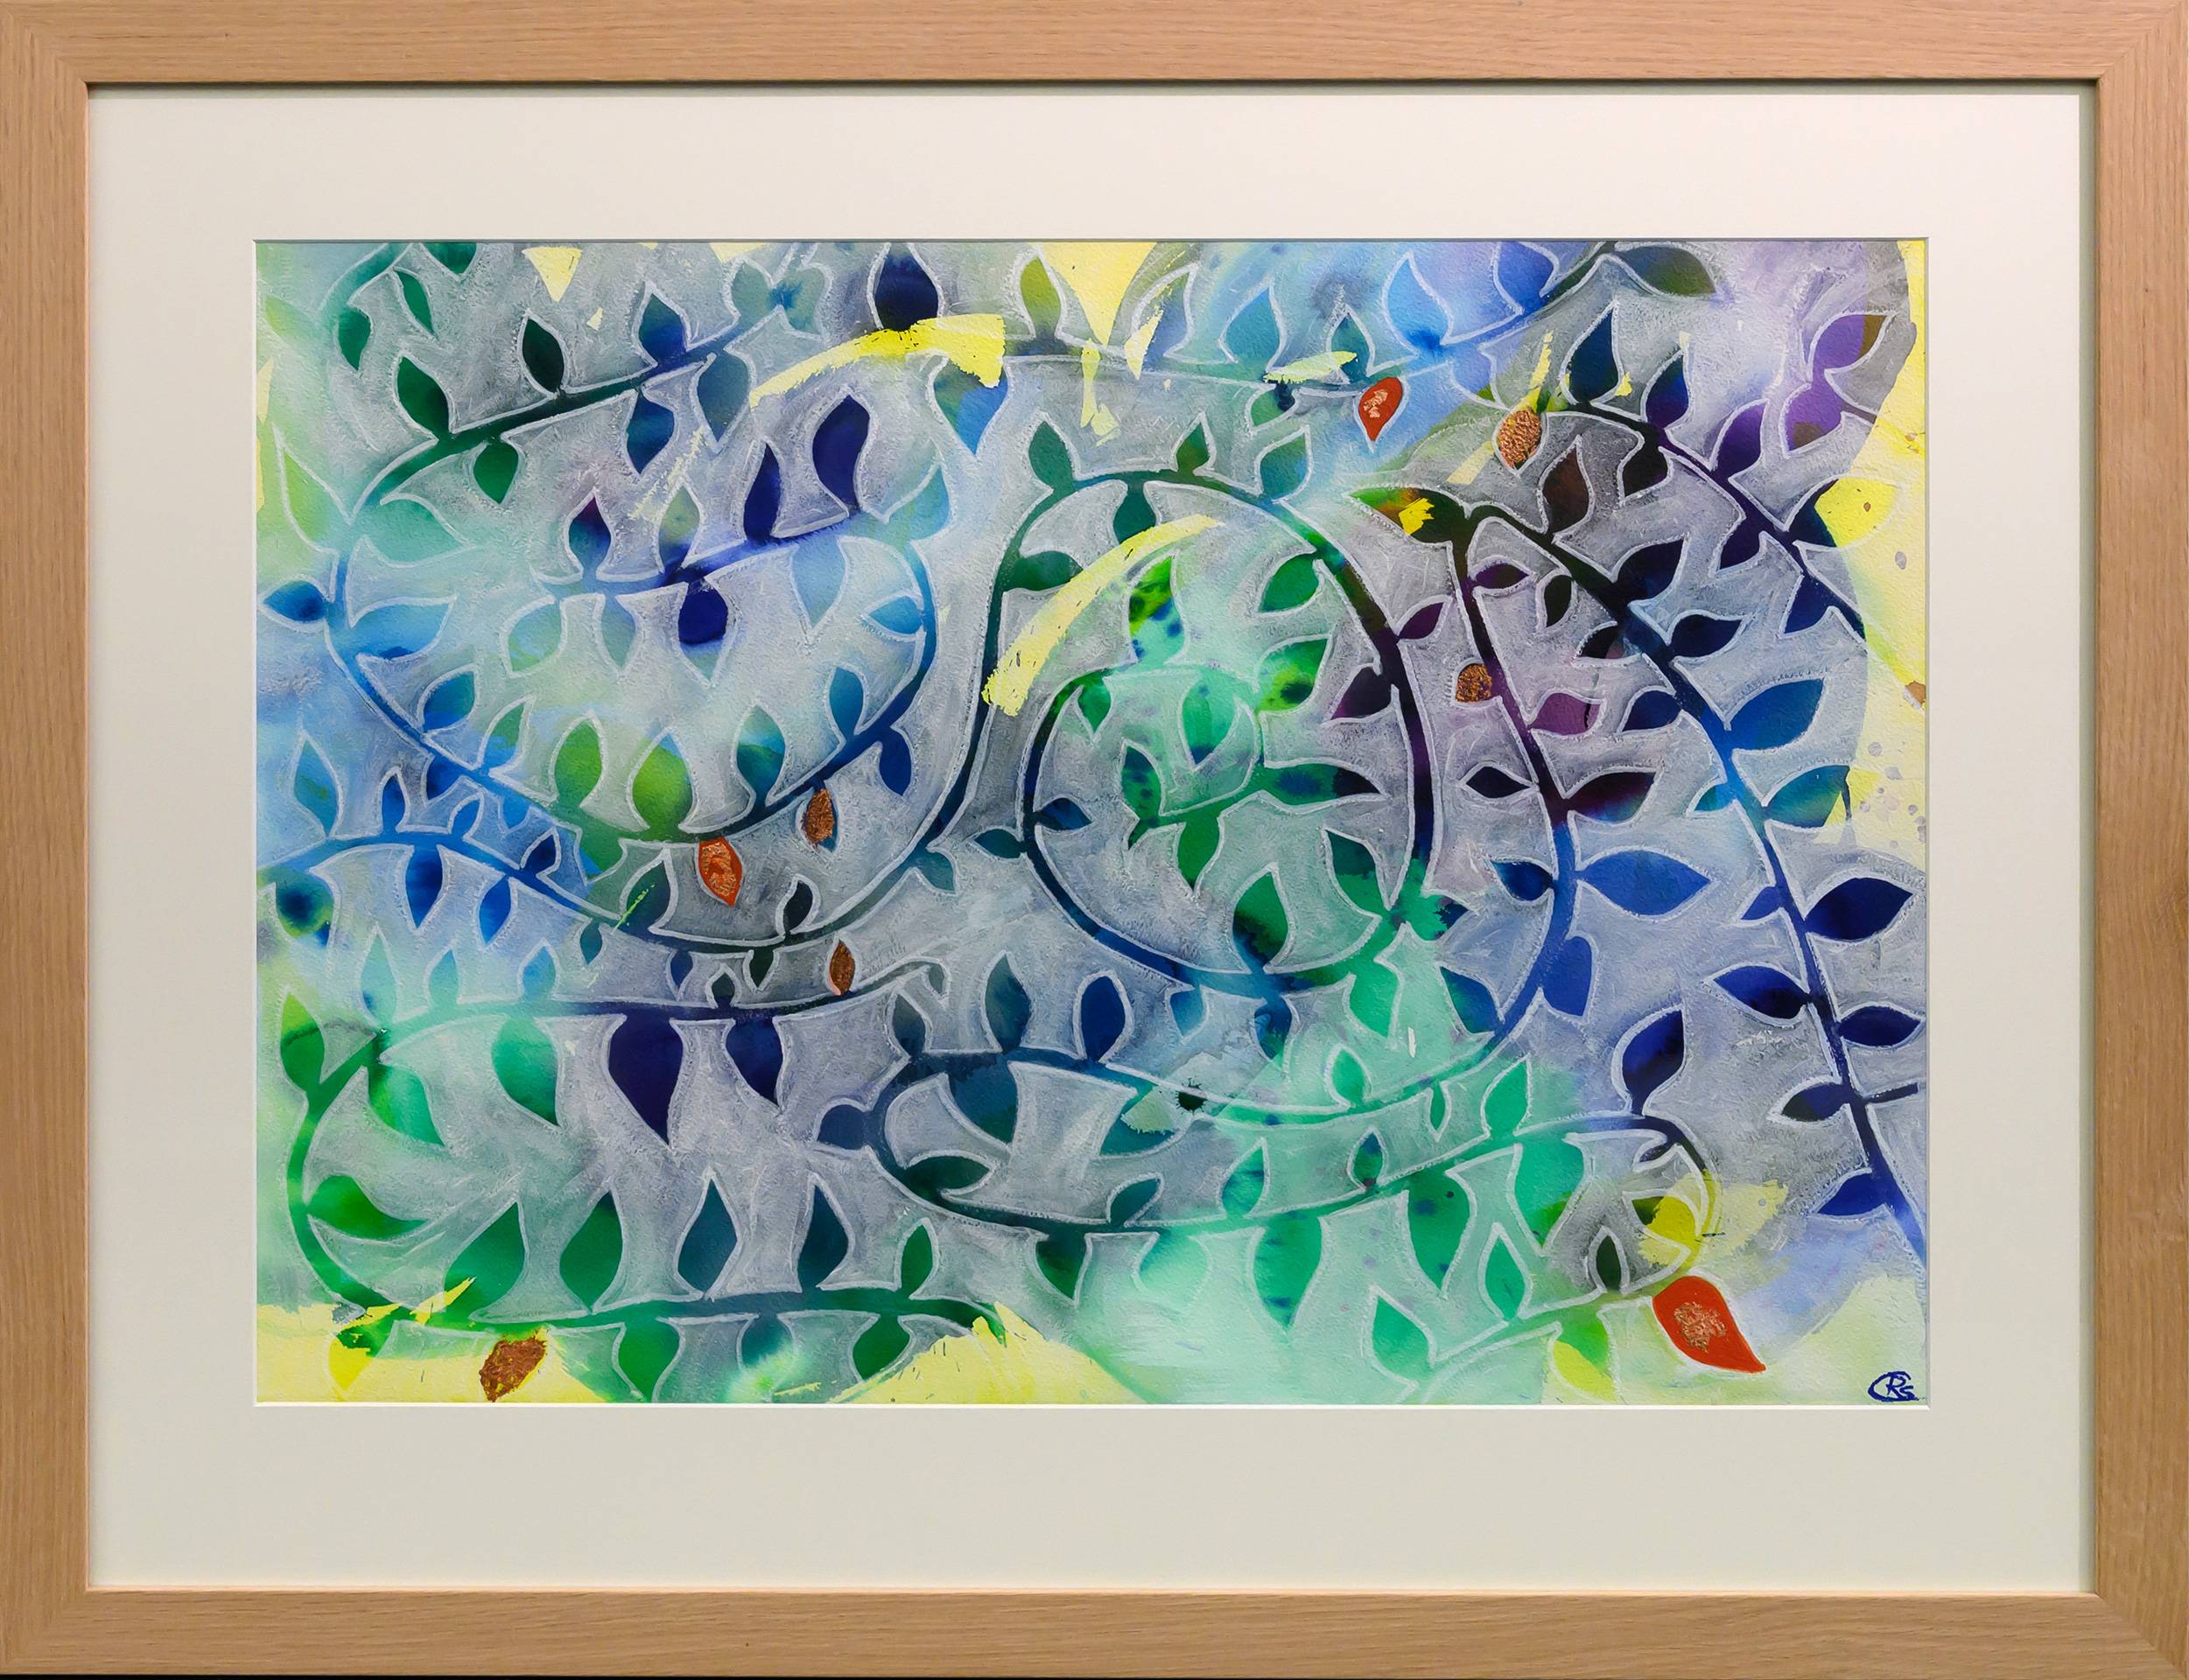 Framed artwork by Ruth Schubert of simplistic vines on a multi-coloured background